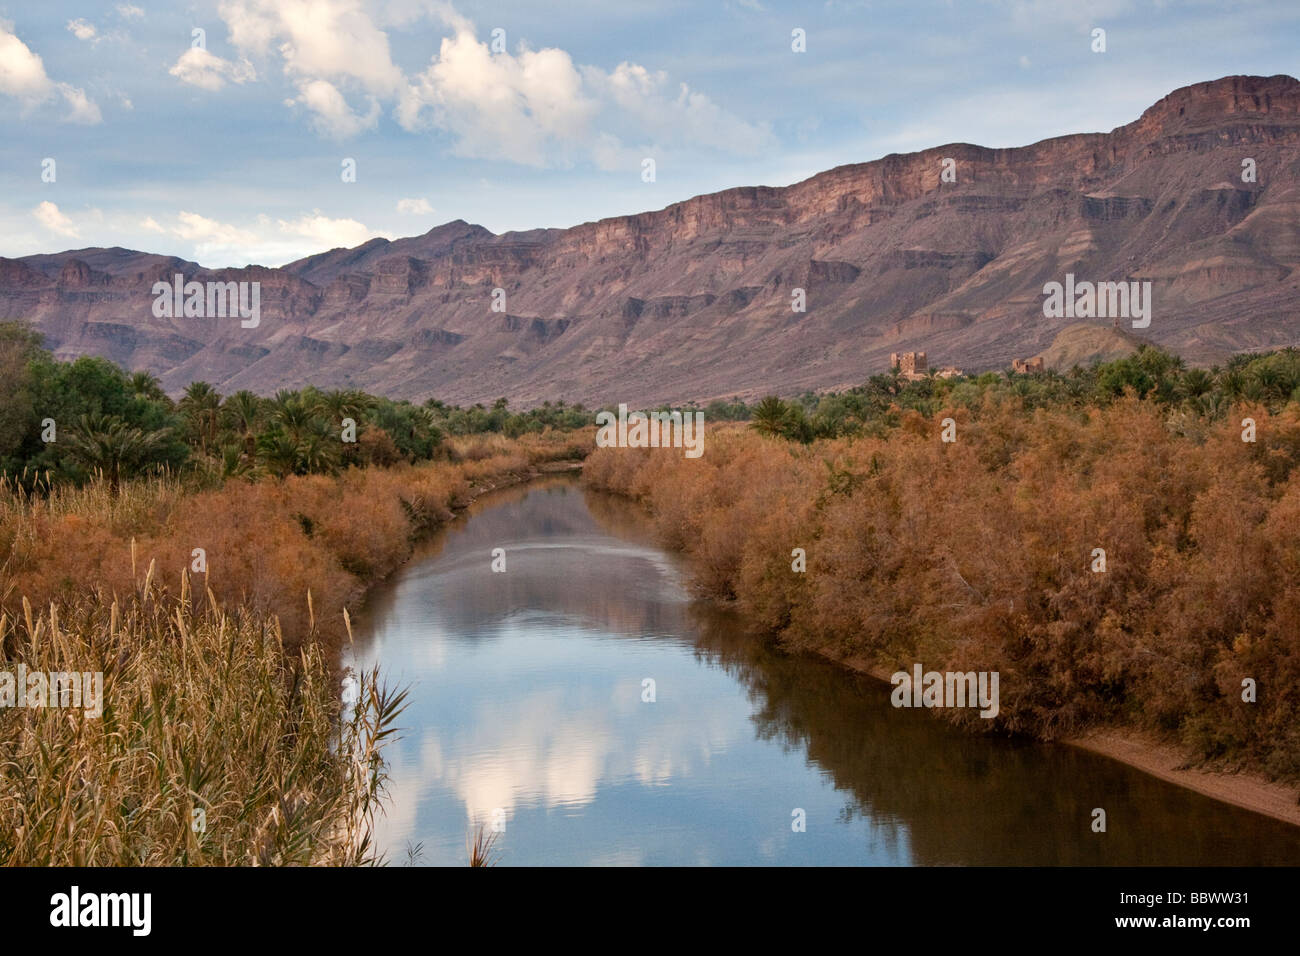 Kasbah of Tamnougalt and Jebel Kissane in the Anti Atlas in the Draa Valley in Morocco North Africa Stock Photo